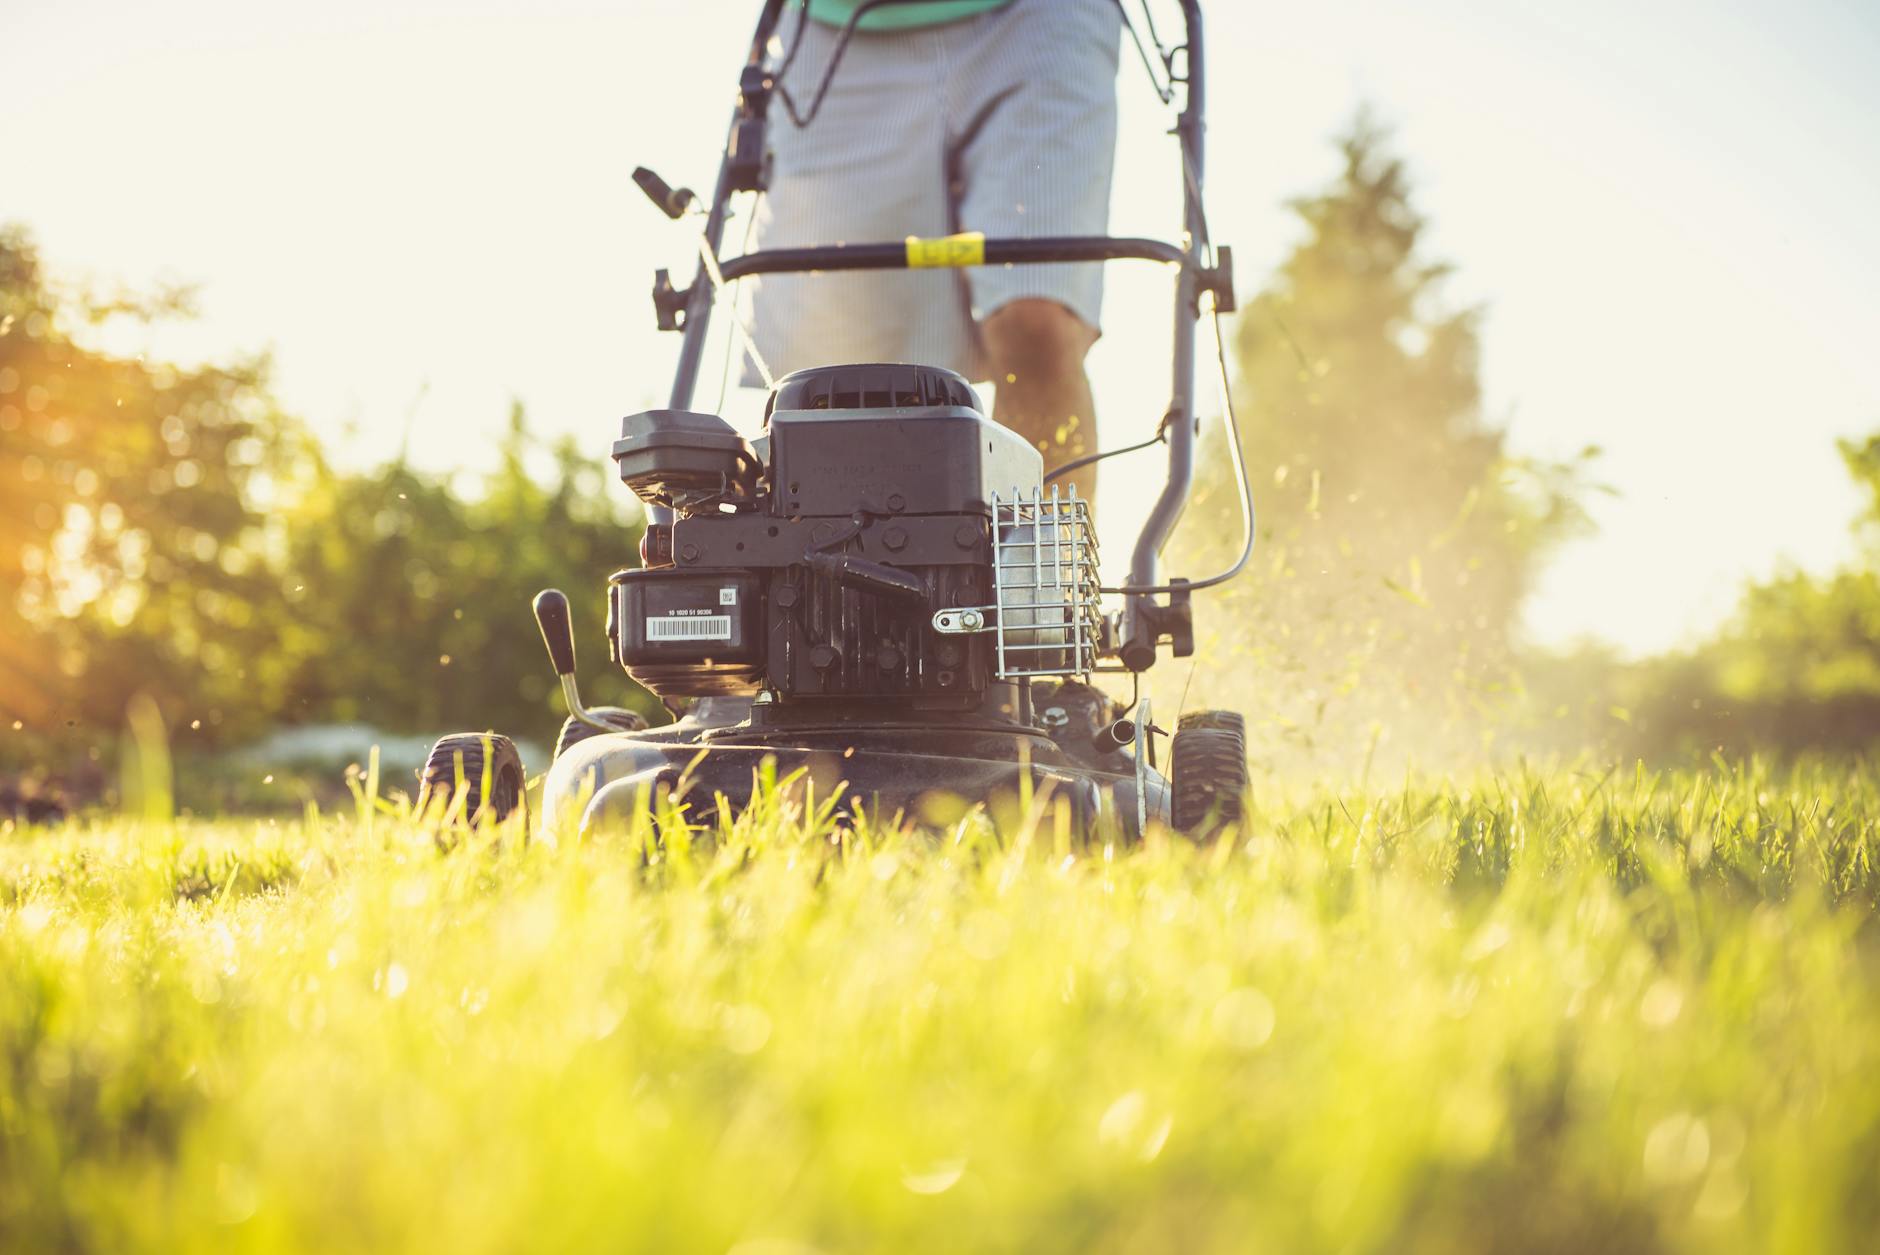 Mowing Your Lawn Too Often Might Make Weed Problems Worse a New Study Explains